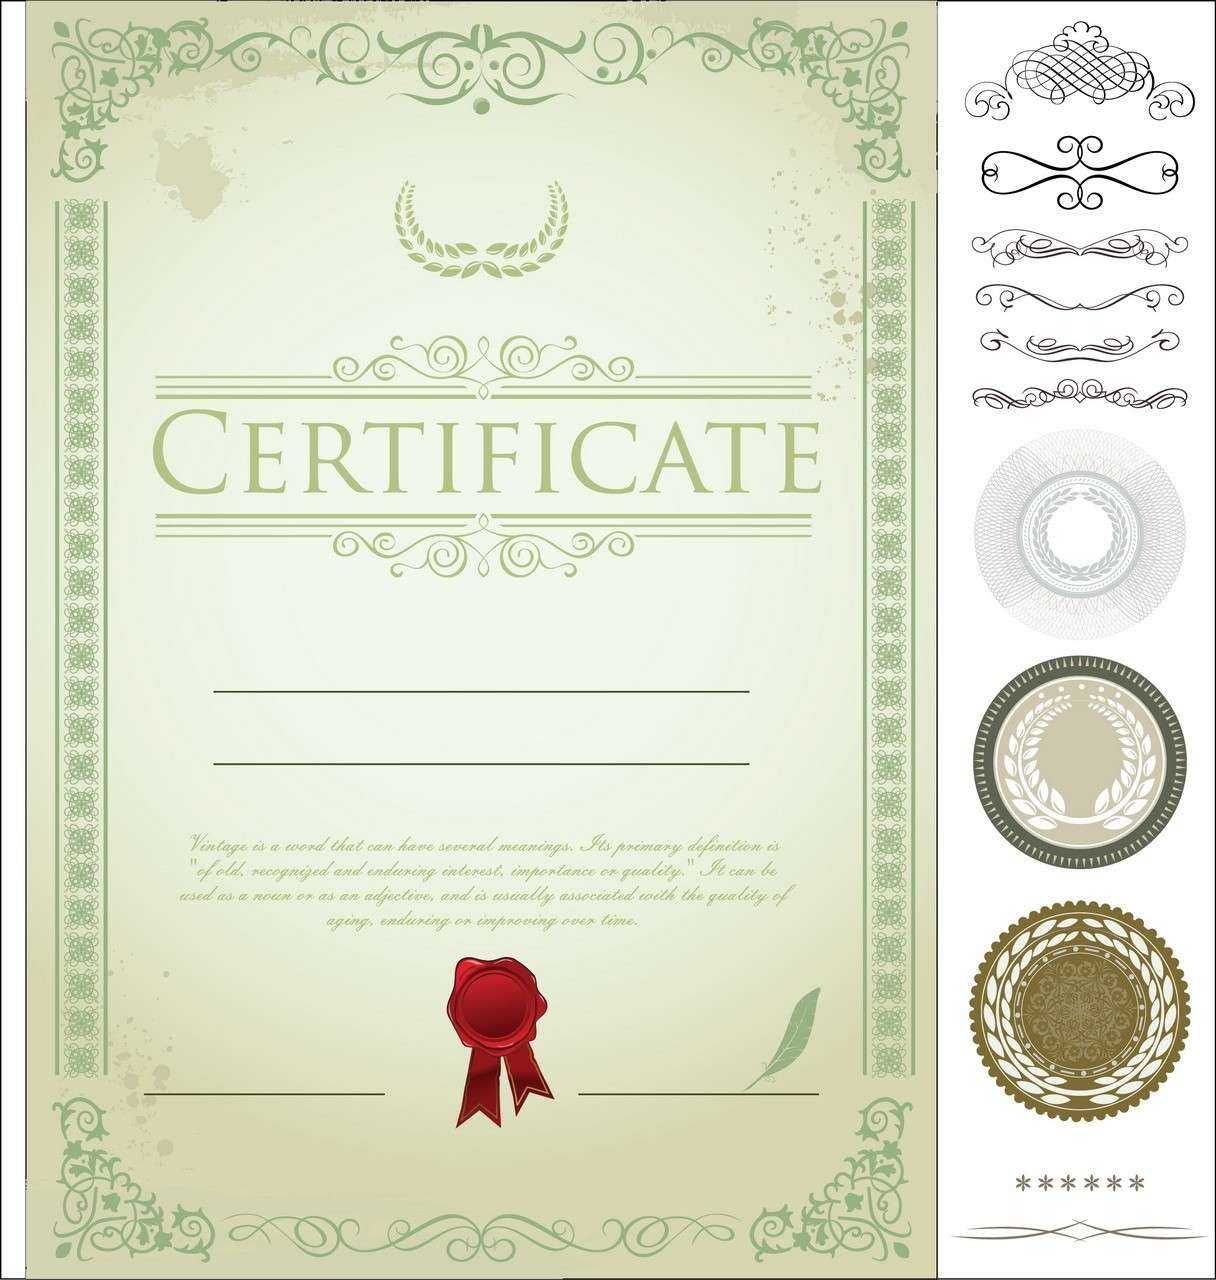 100+ [ Certificate Psd Template Free ] | Marathi Birthday Intended For This Entitles The Bearer To Template Certificate